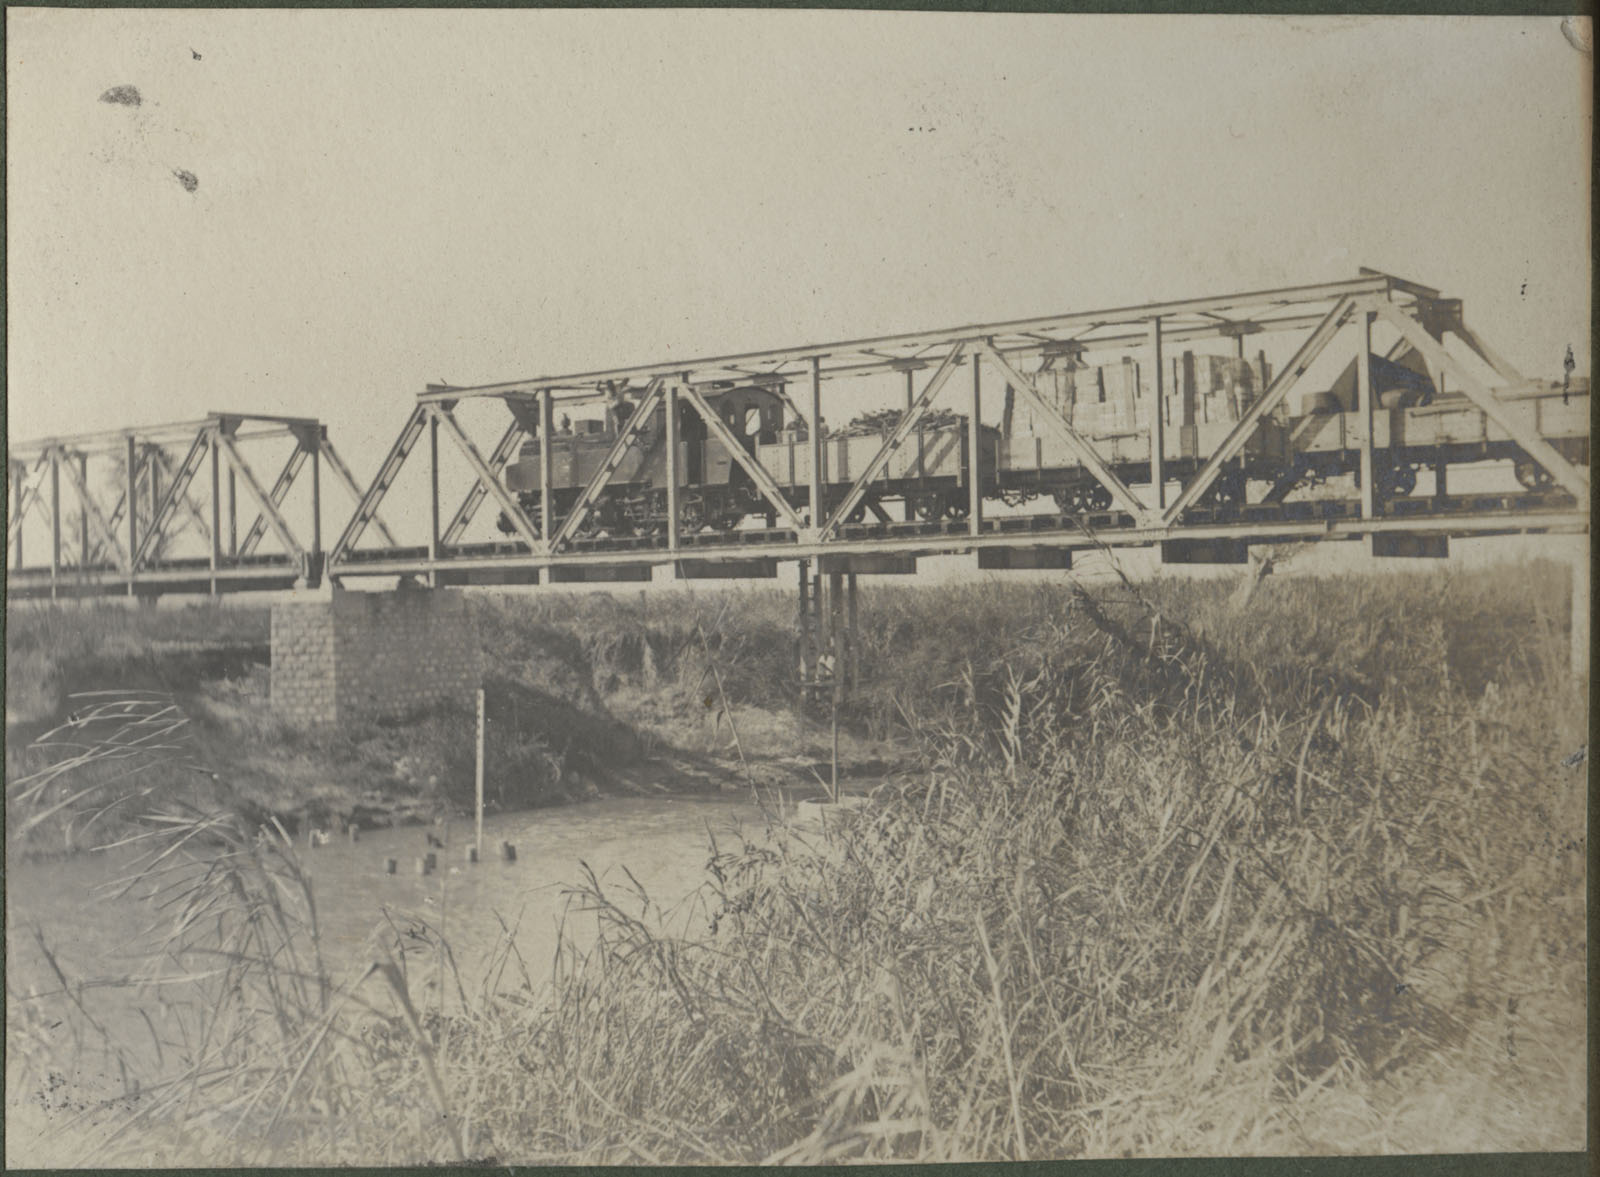 Black and white photograph of a train going over a bridge over a river